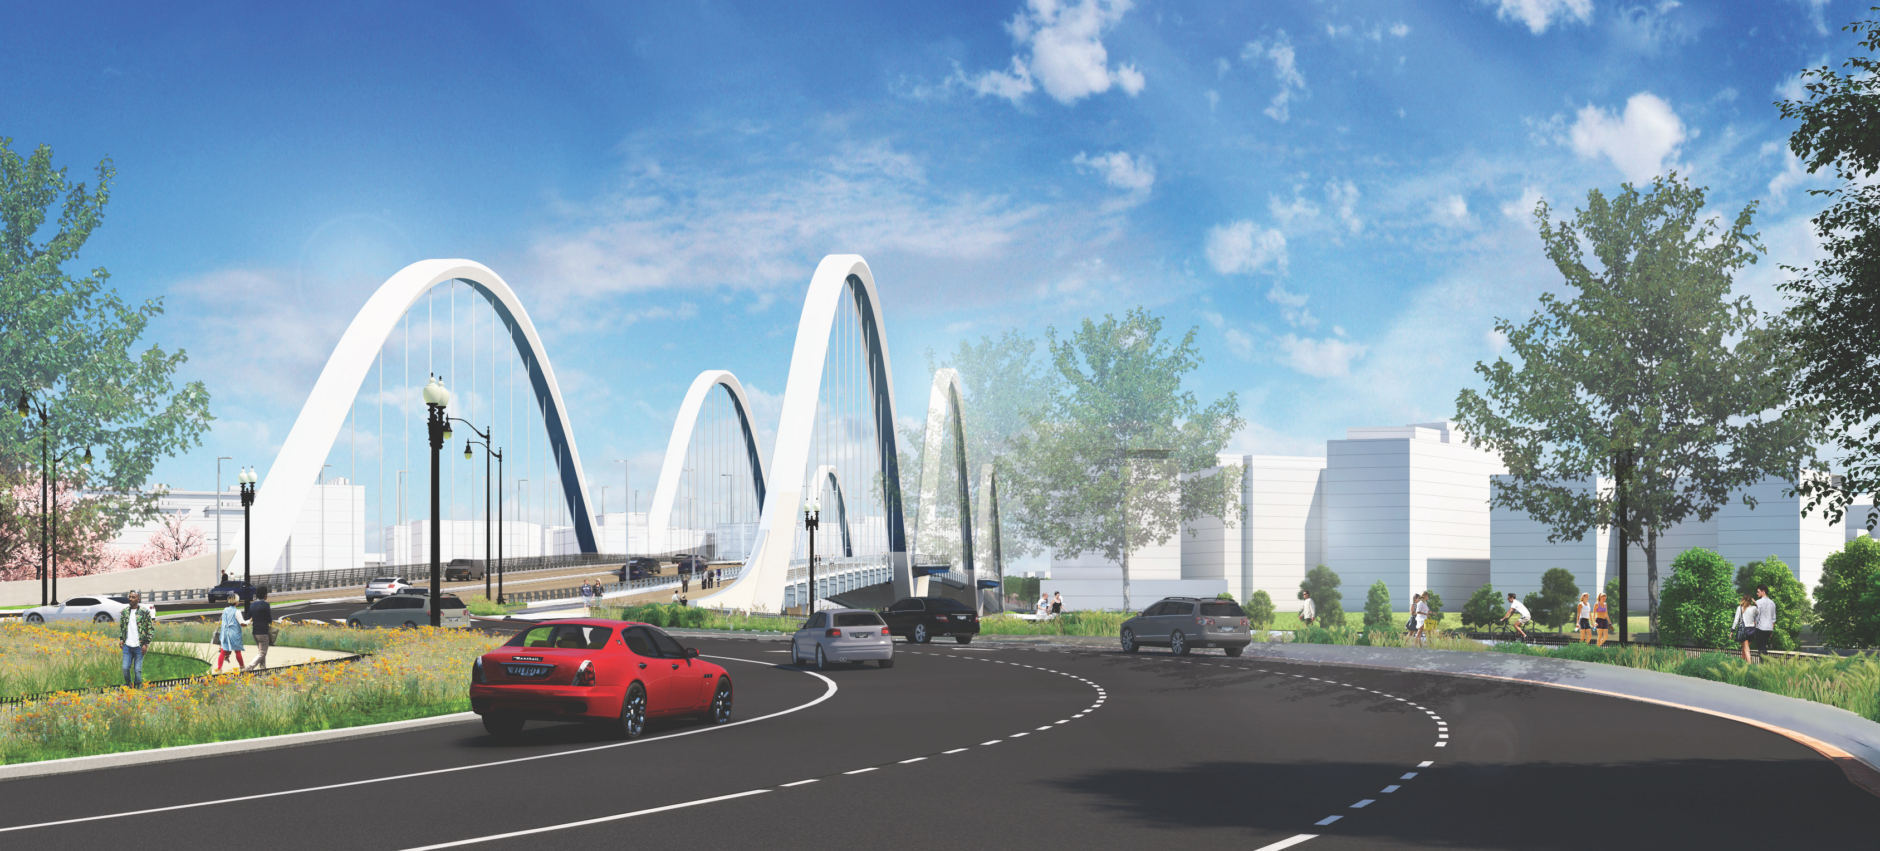 The 68-year-old bridge’s replacement, years in the making, is scheduled to open in March 2021. Its design features four pedestrian overlooks, three above-deck arches and two piers that will appear to float in the river. (Courtesy DDOT)